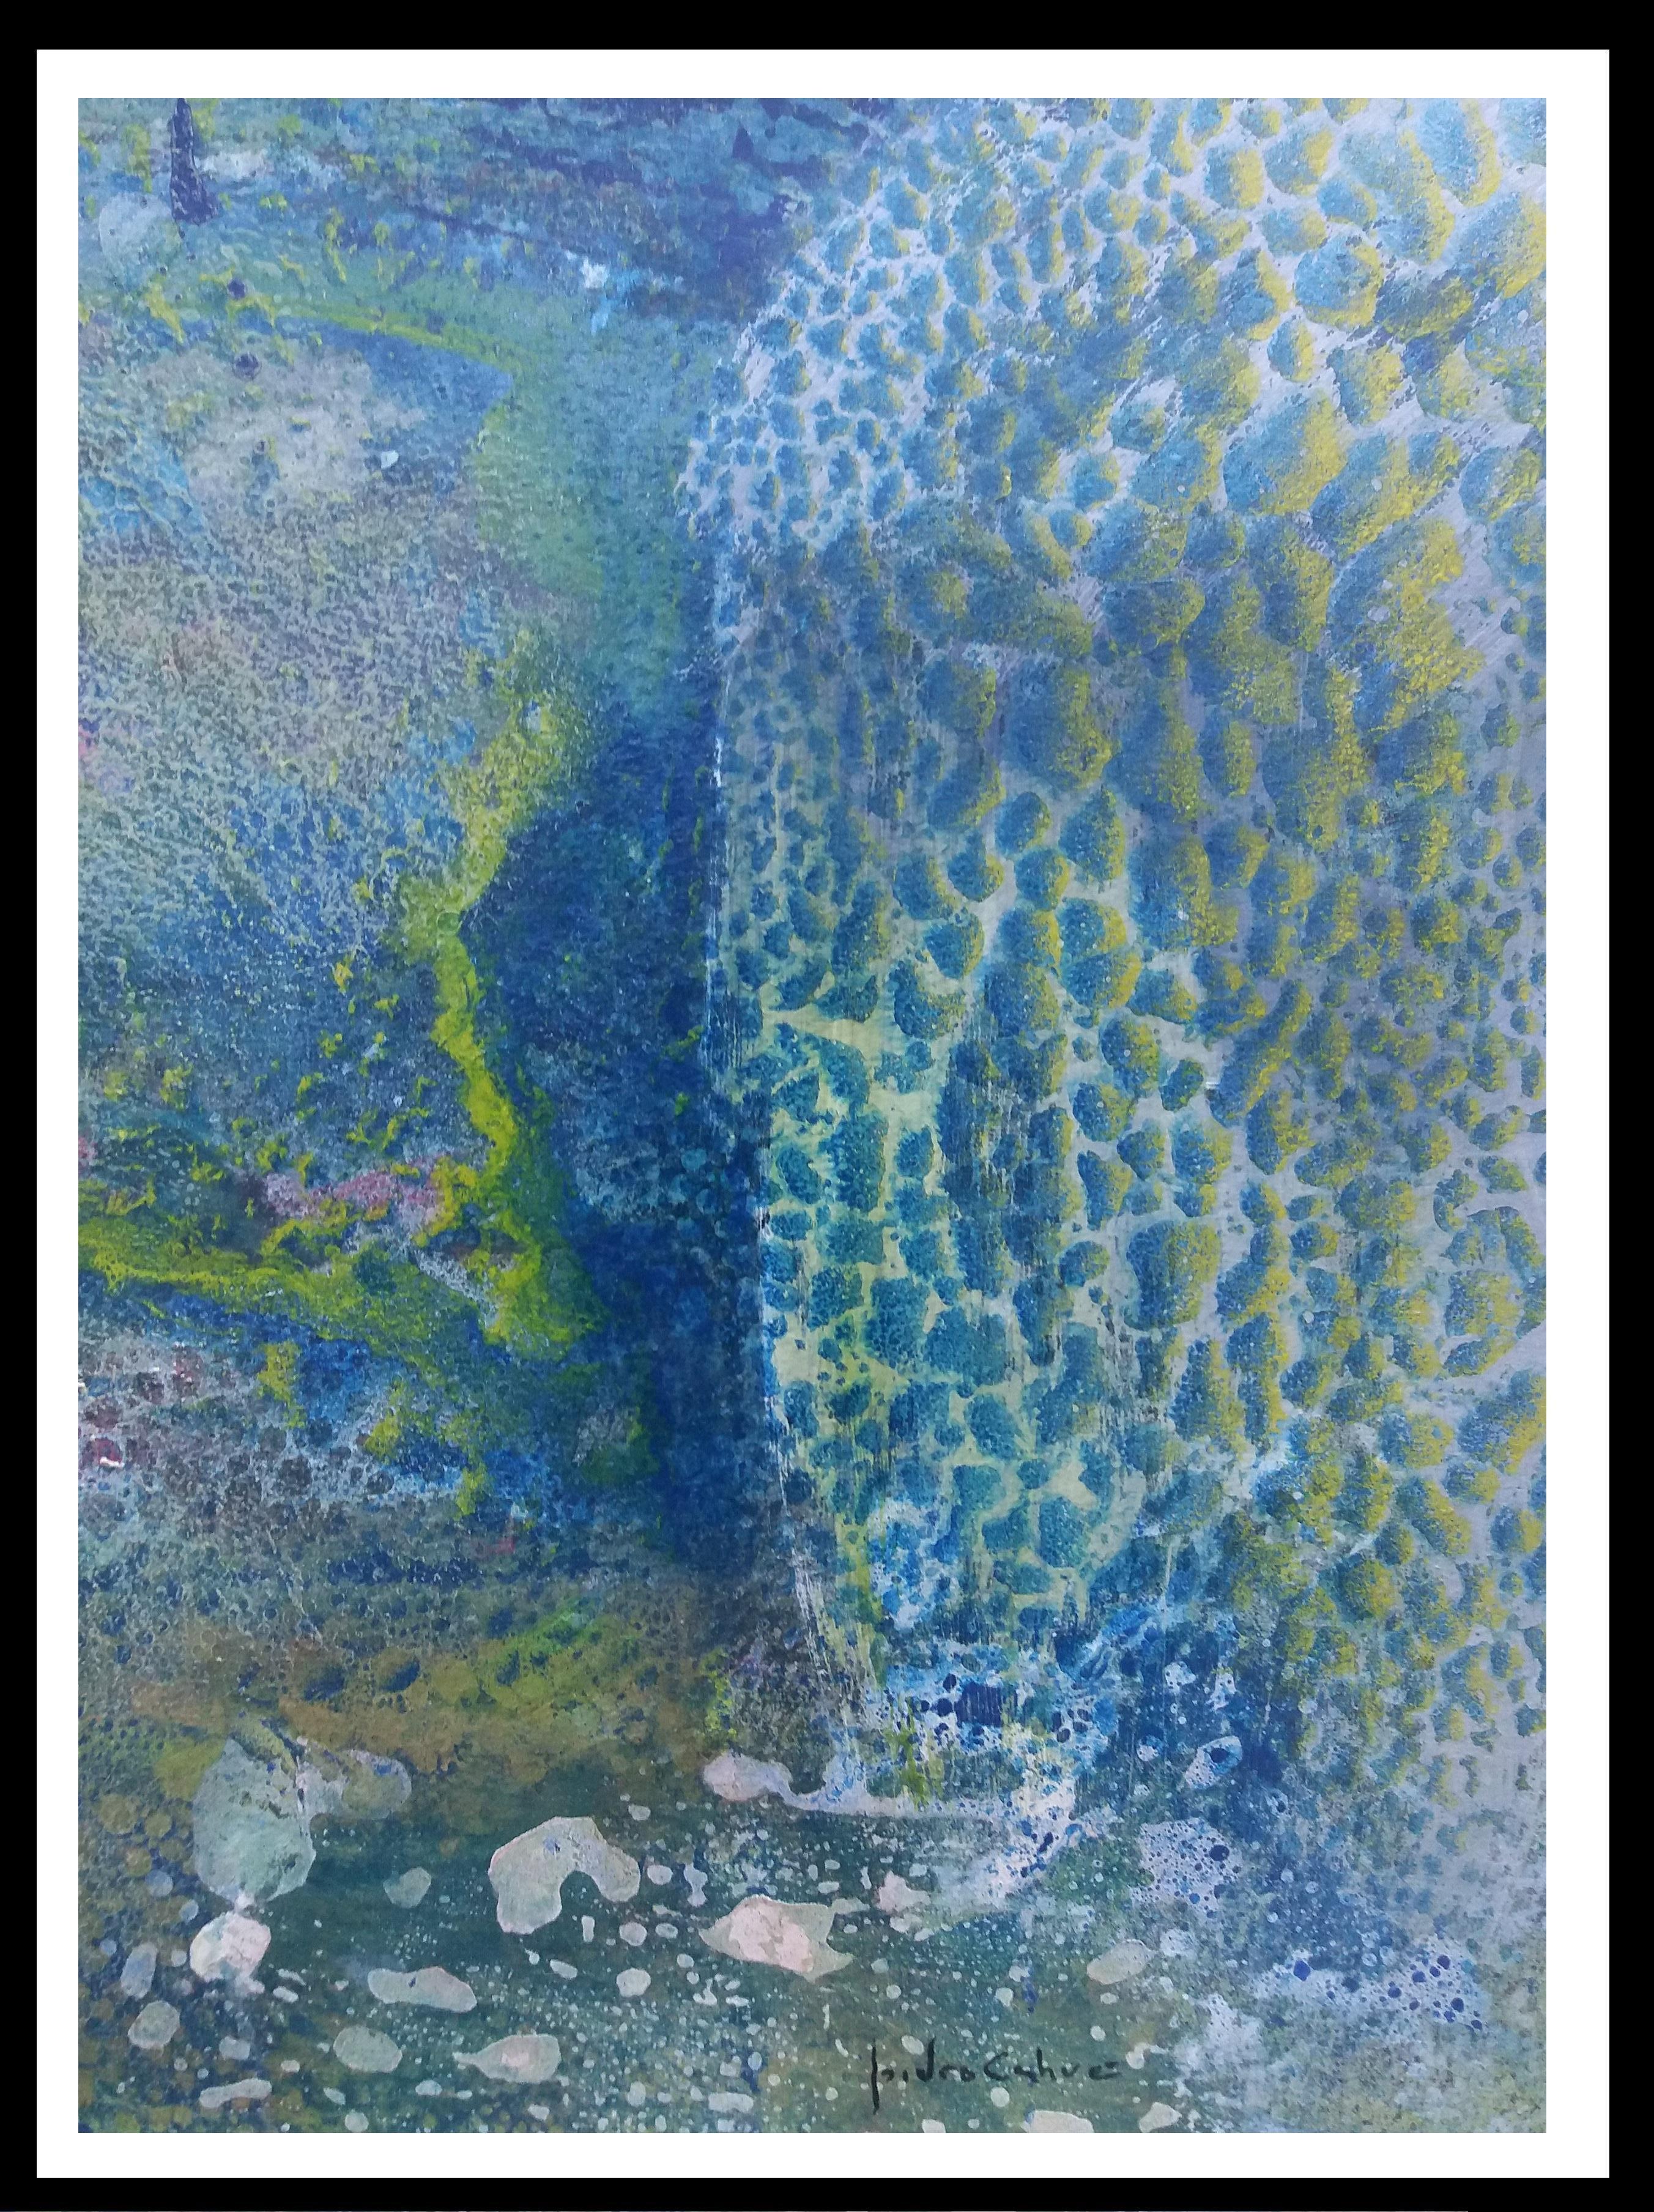  I. Cahue  40 Vertical  Blue Drops Effect    original  acrylic paper painting